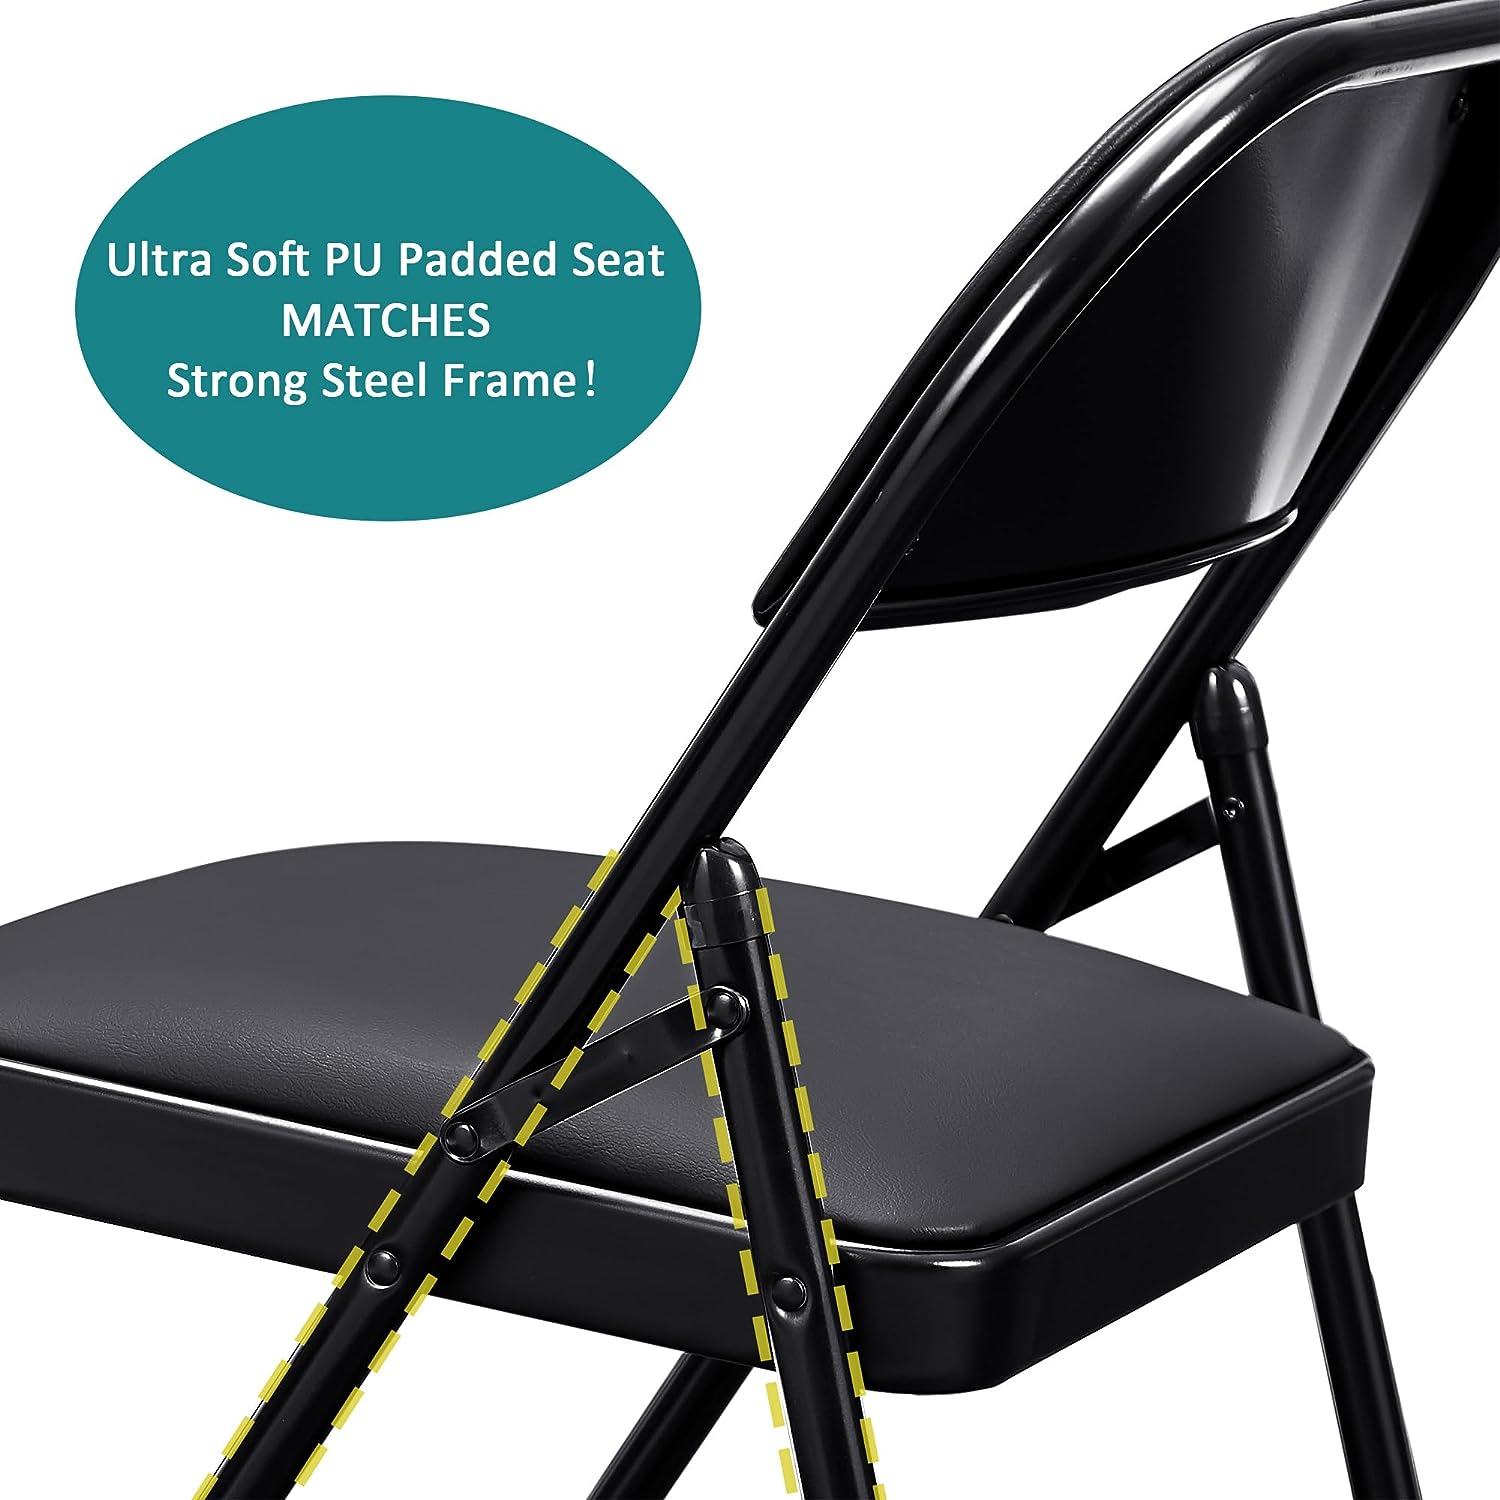 VECELO 4-Pack Portable Metal Folding Chairs with PU Padded Soft Seats Black